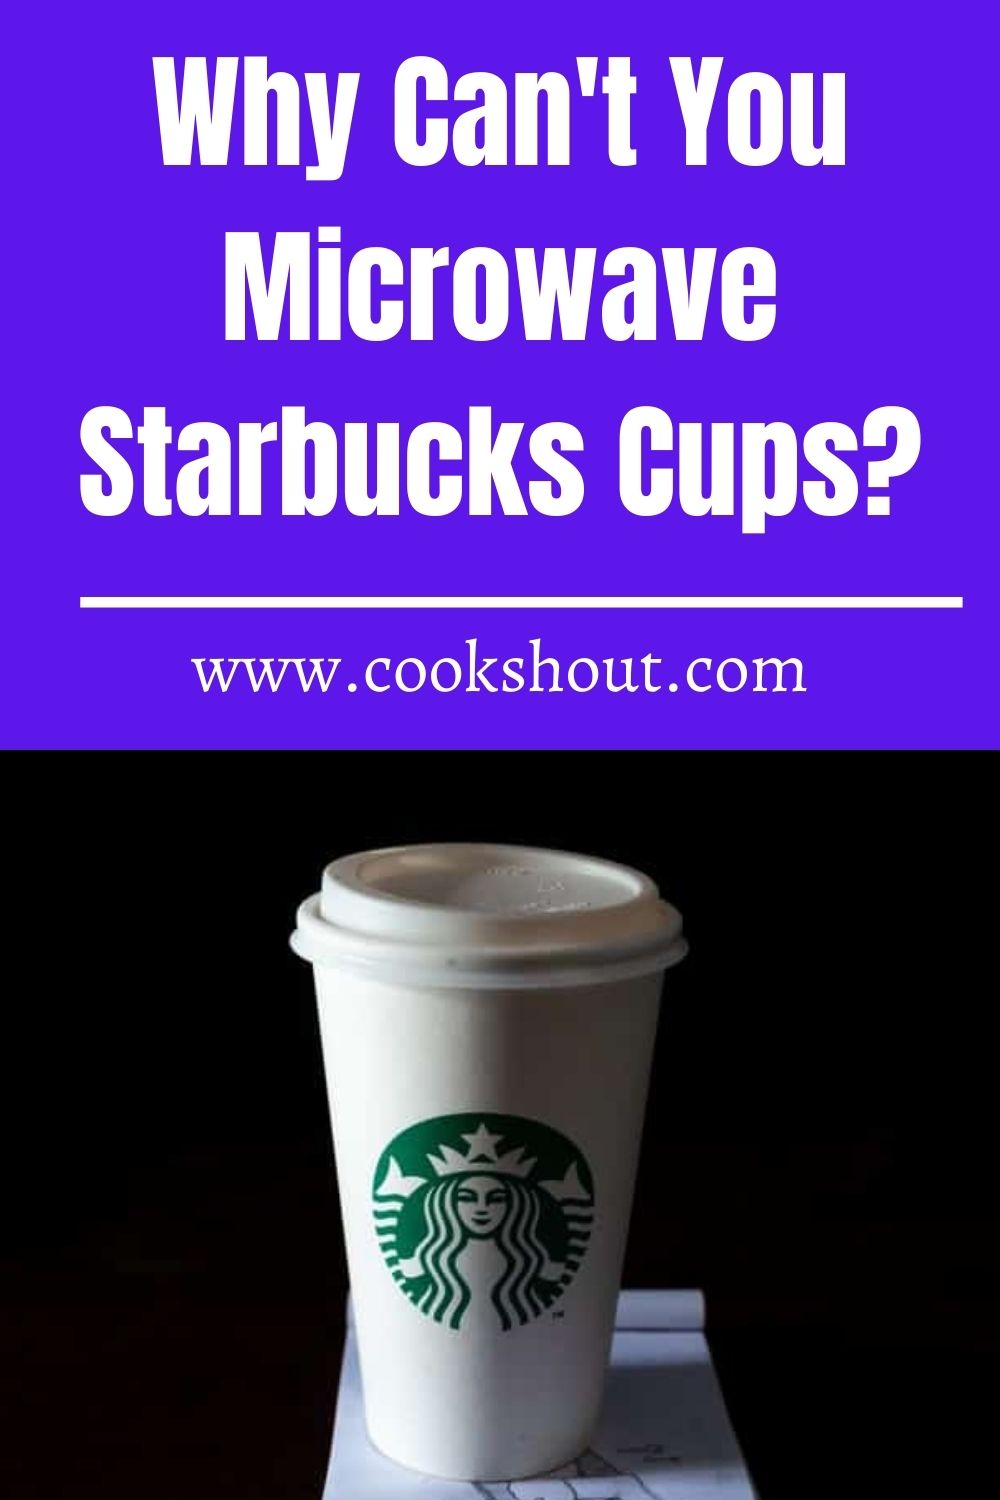 why can't you microwave starbucks ceramic cups